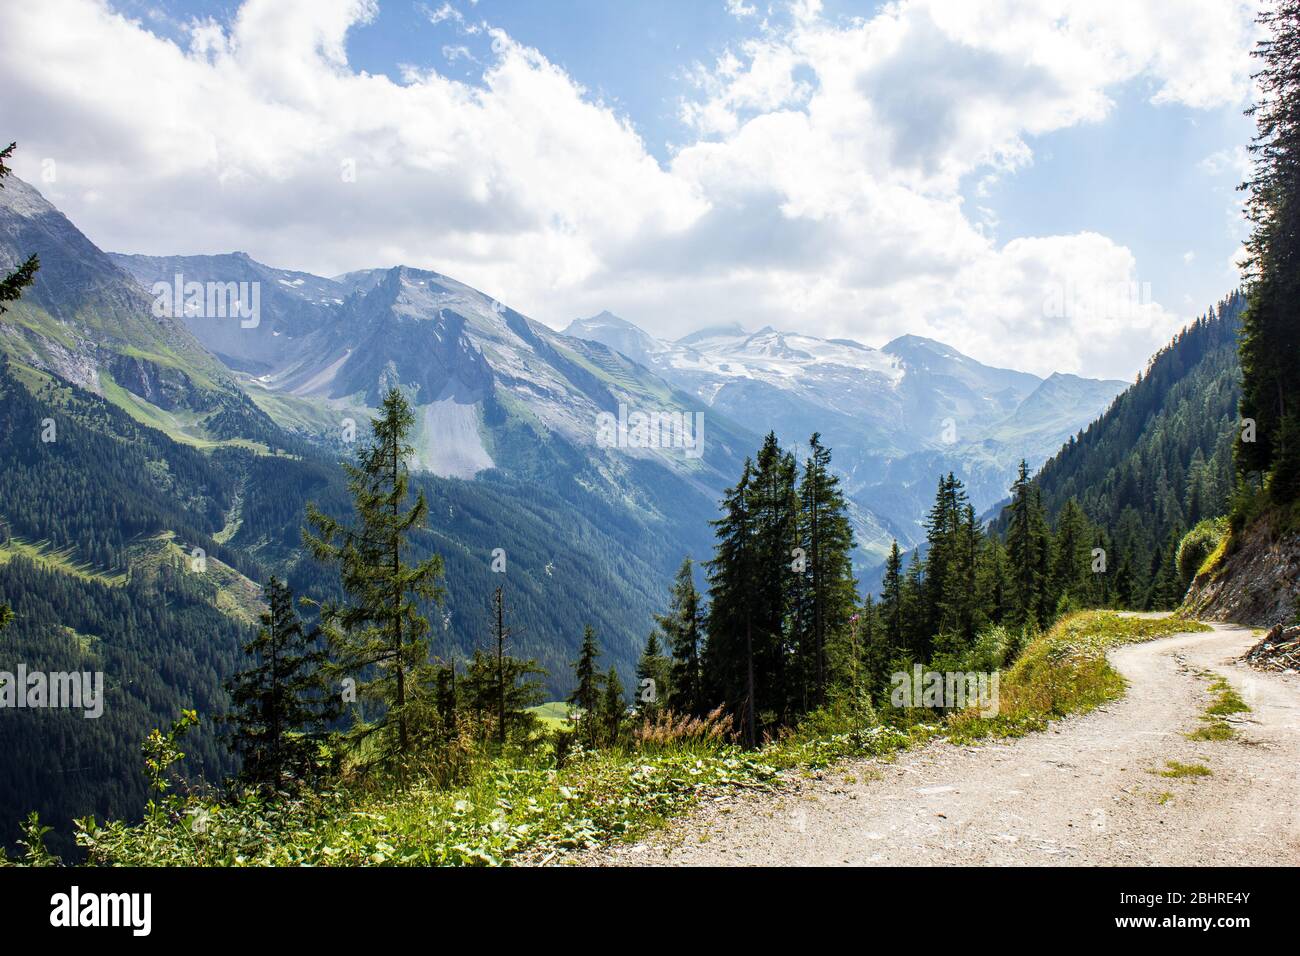 Hiking Trail with Hintertux Glacier in the Background Stock Photo